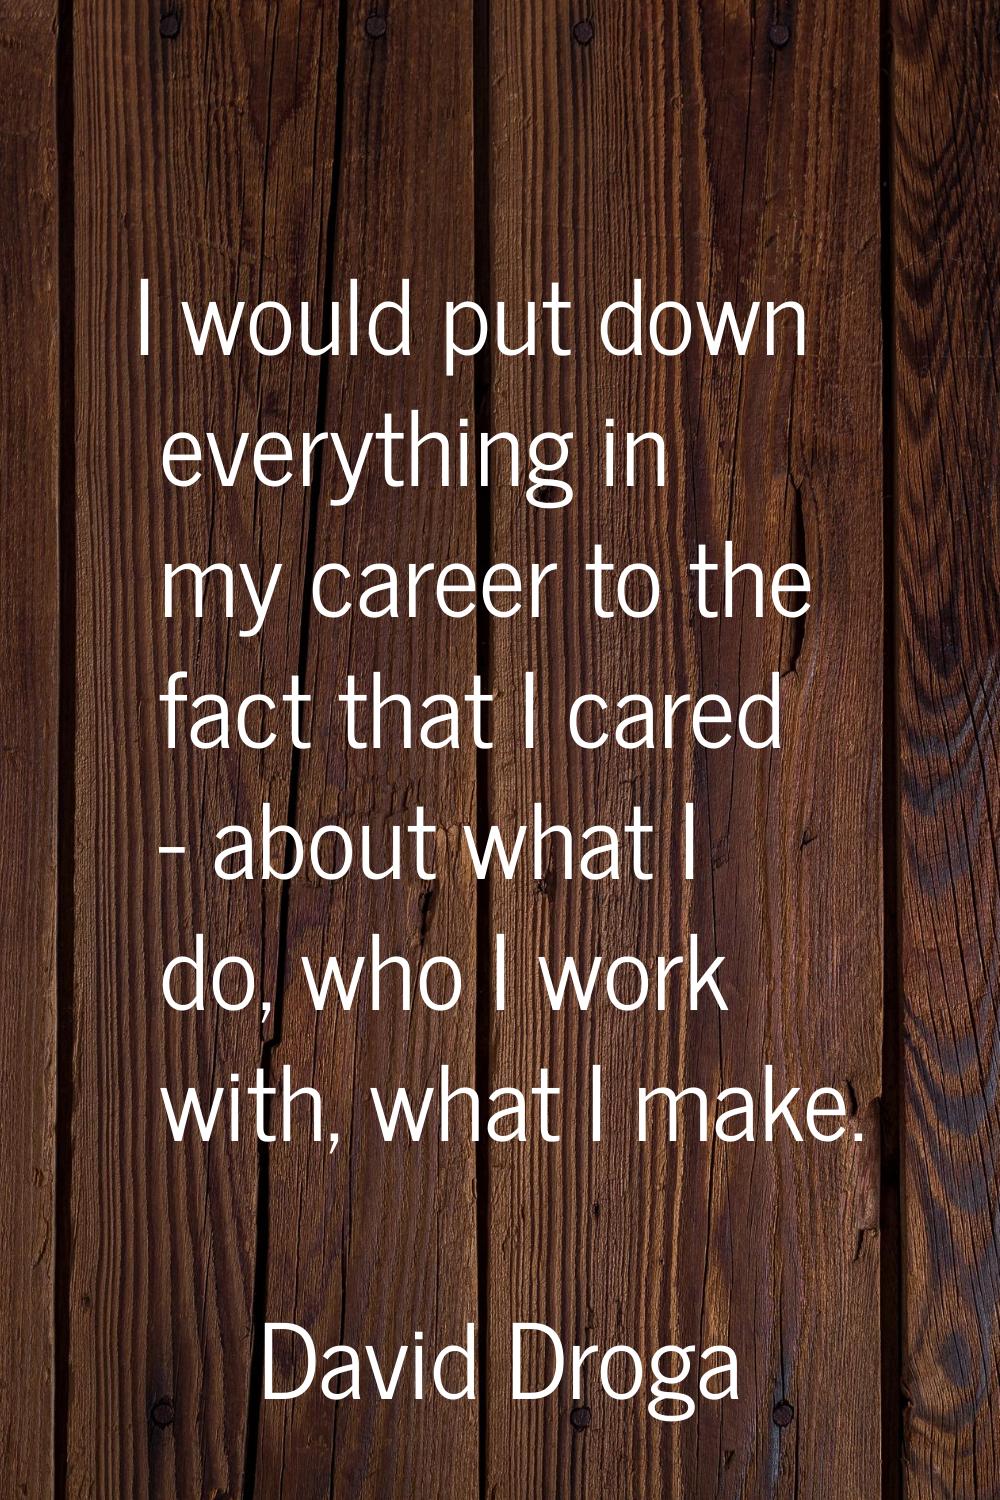 I would put down everything in my career to the fact that I cared - about what I do, who I work wit